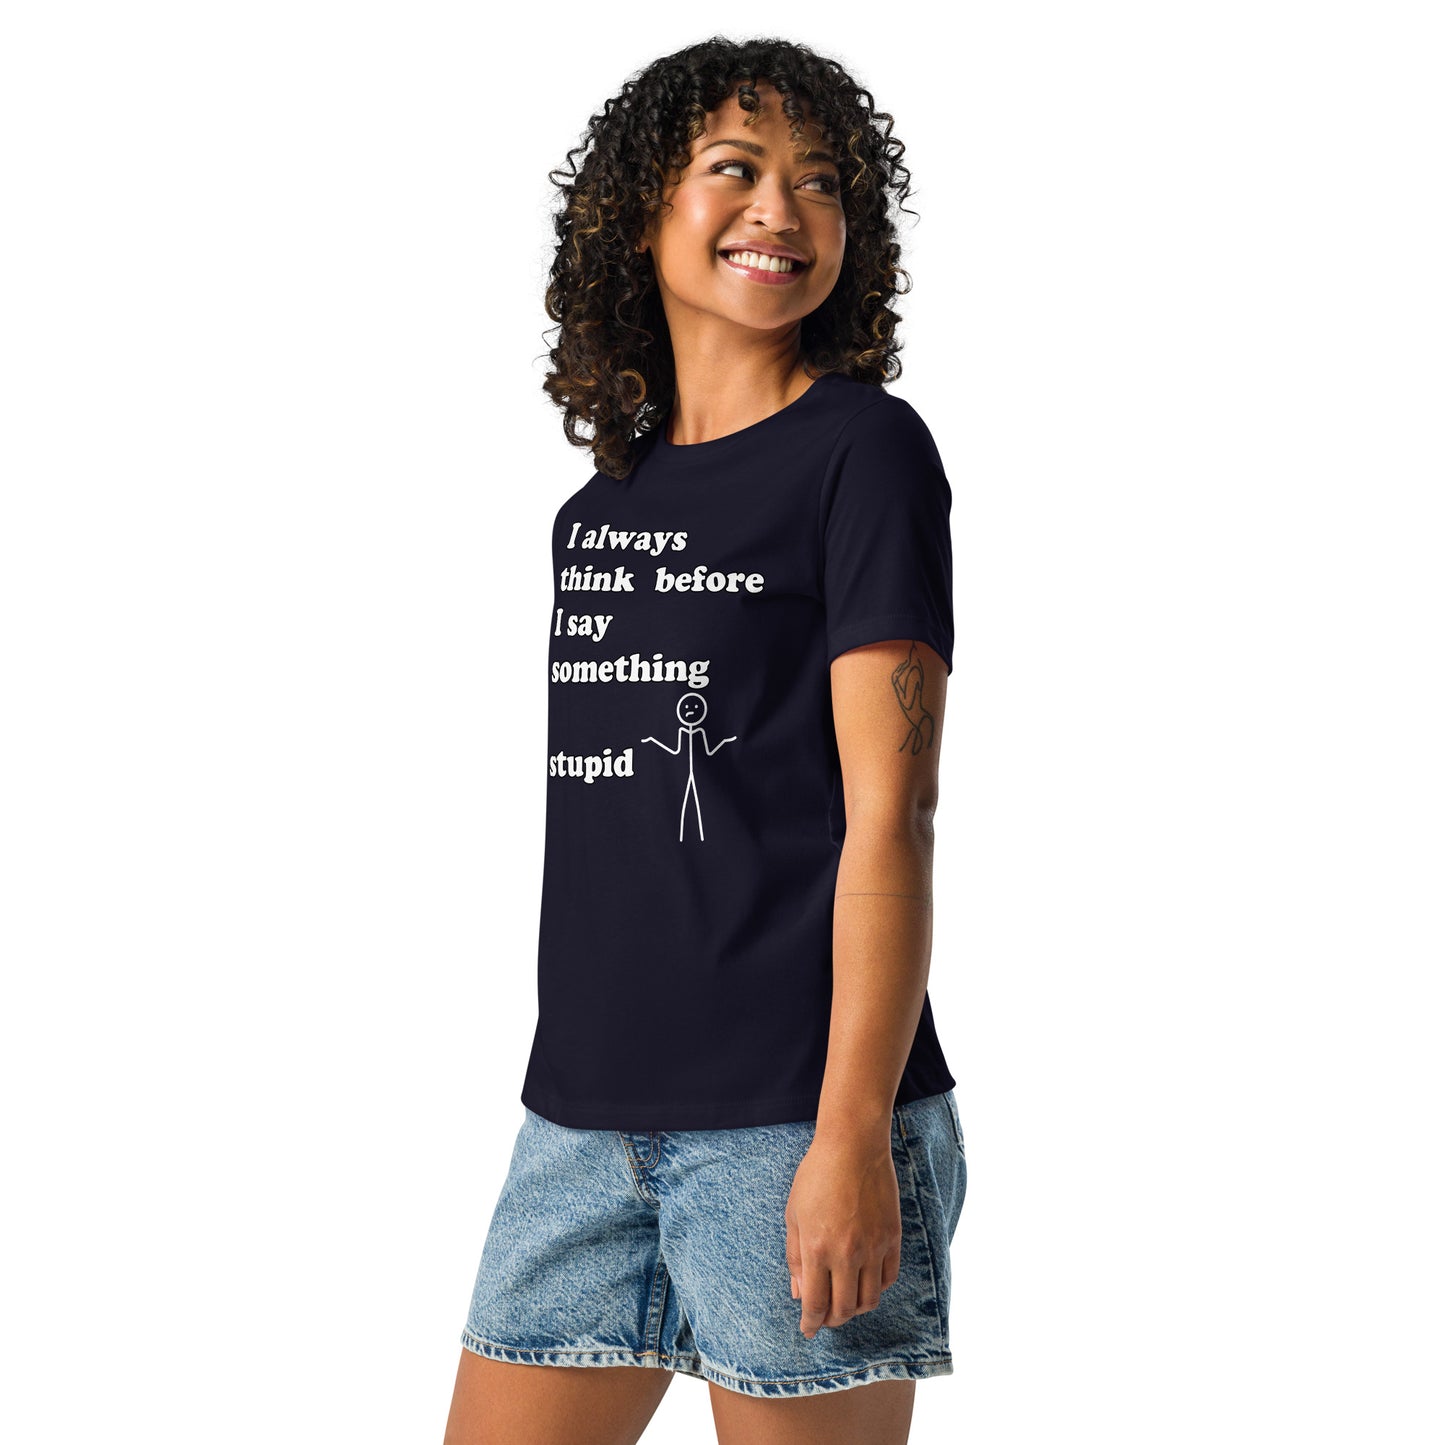 Woman with navy blue t-shirt with text "I always think before I say something stupid"